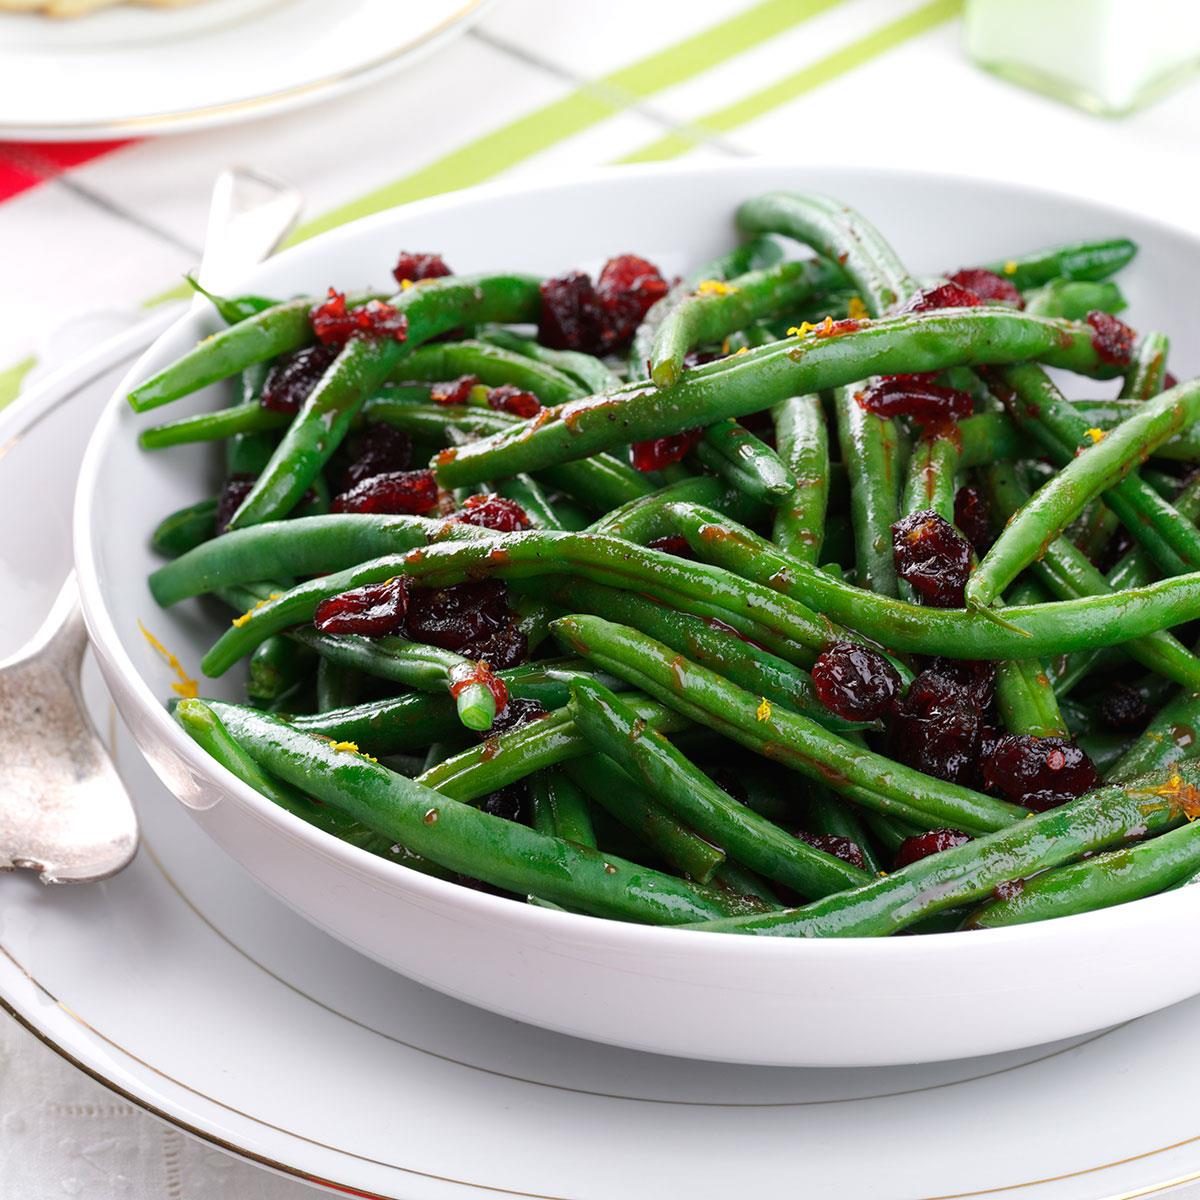 Pomegranate-Glazed Green Beans Recipe: How to Make It